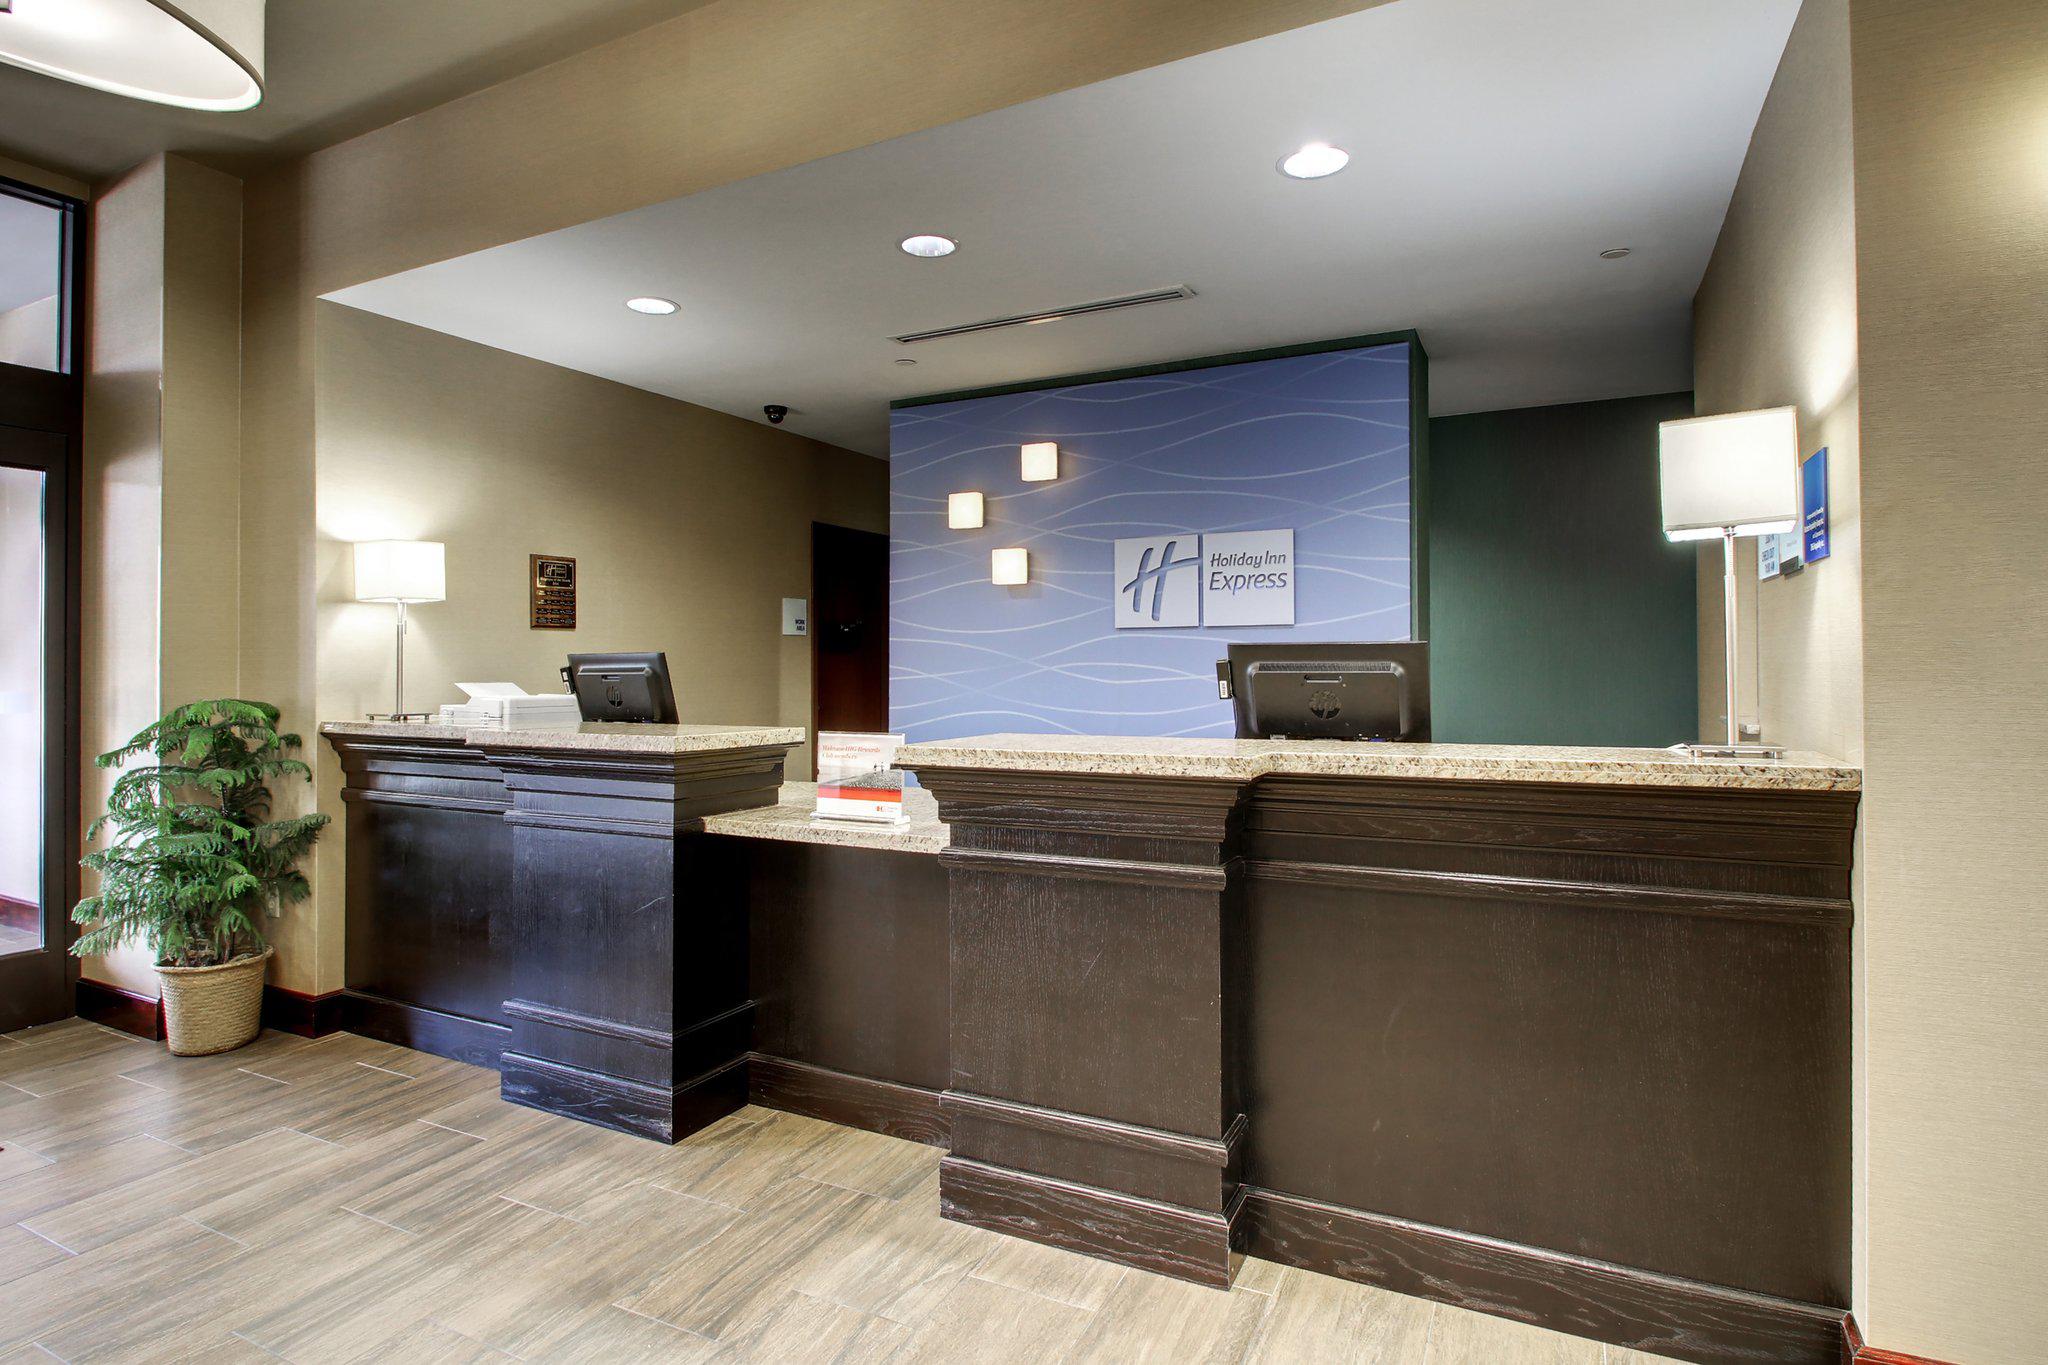 Holiday Inn Express & Suites Natchez South Photo